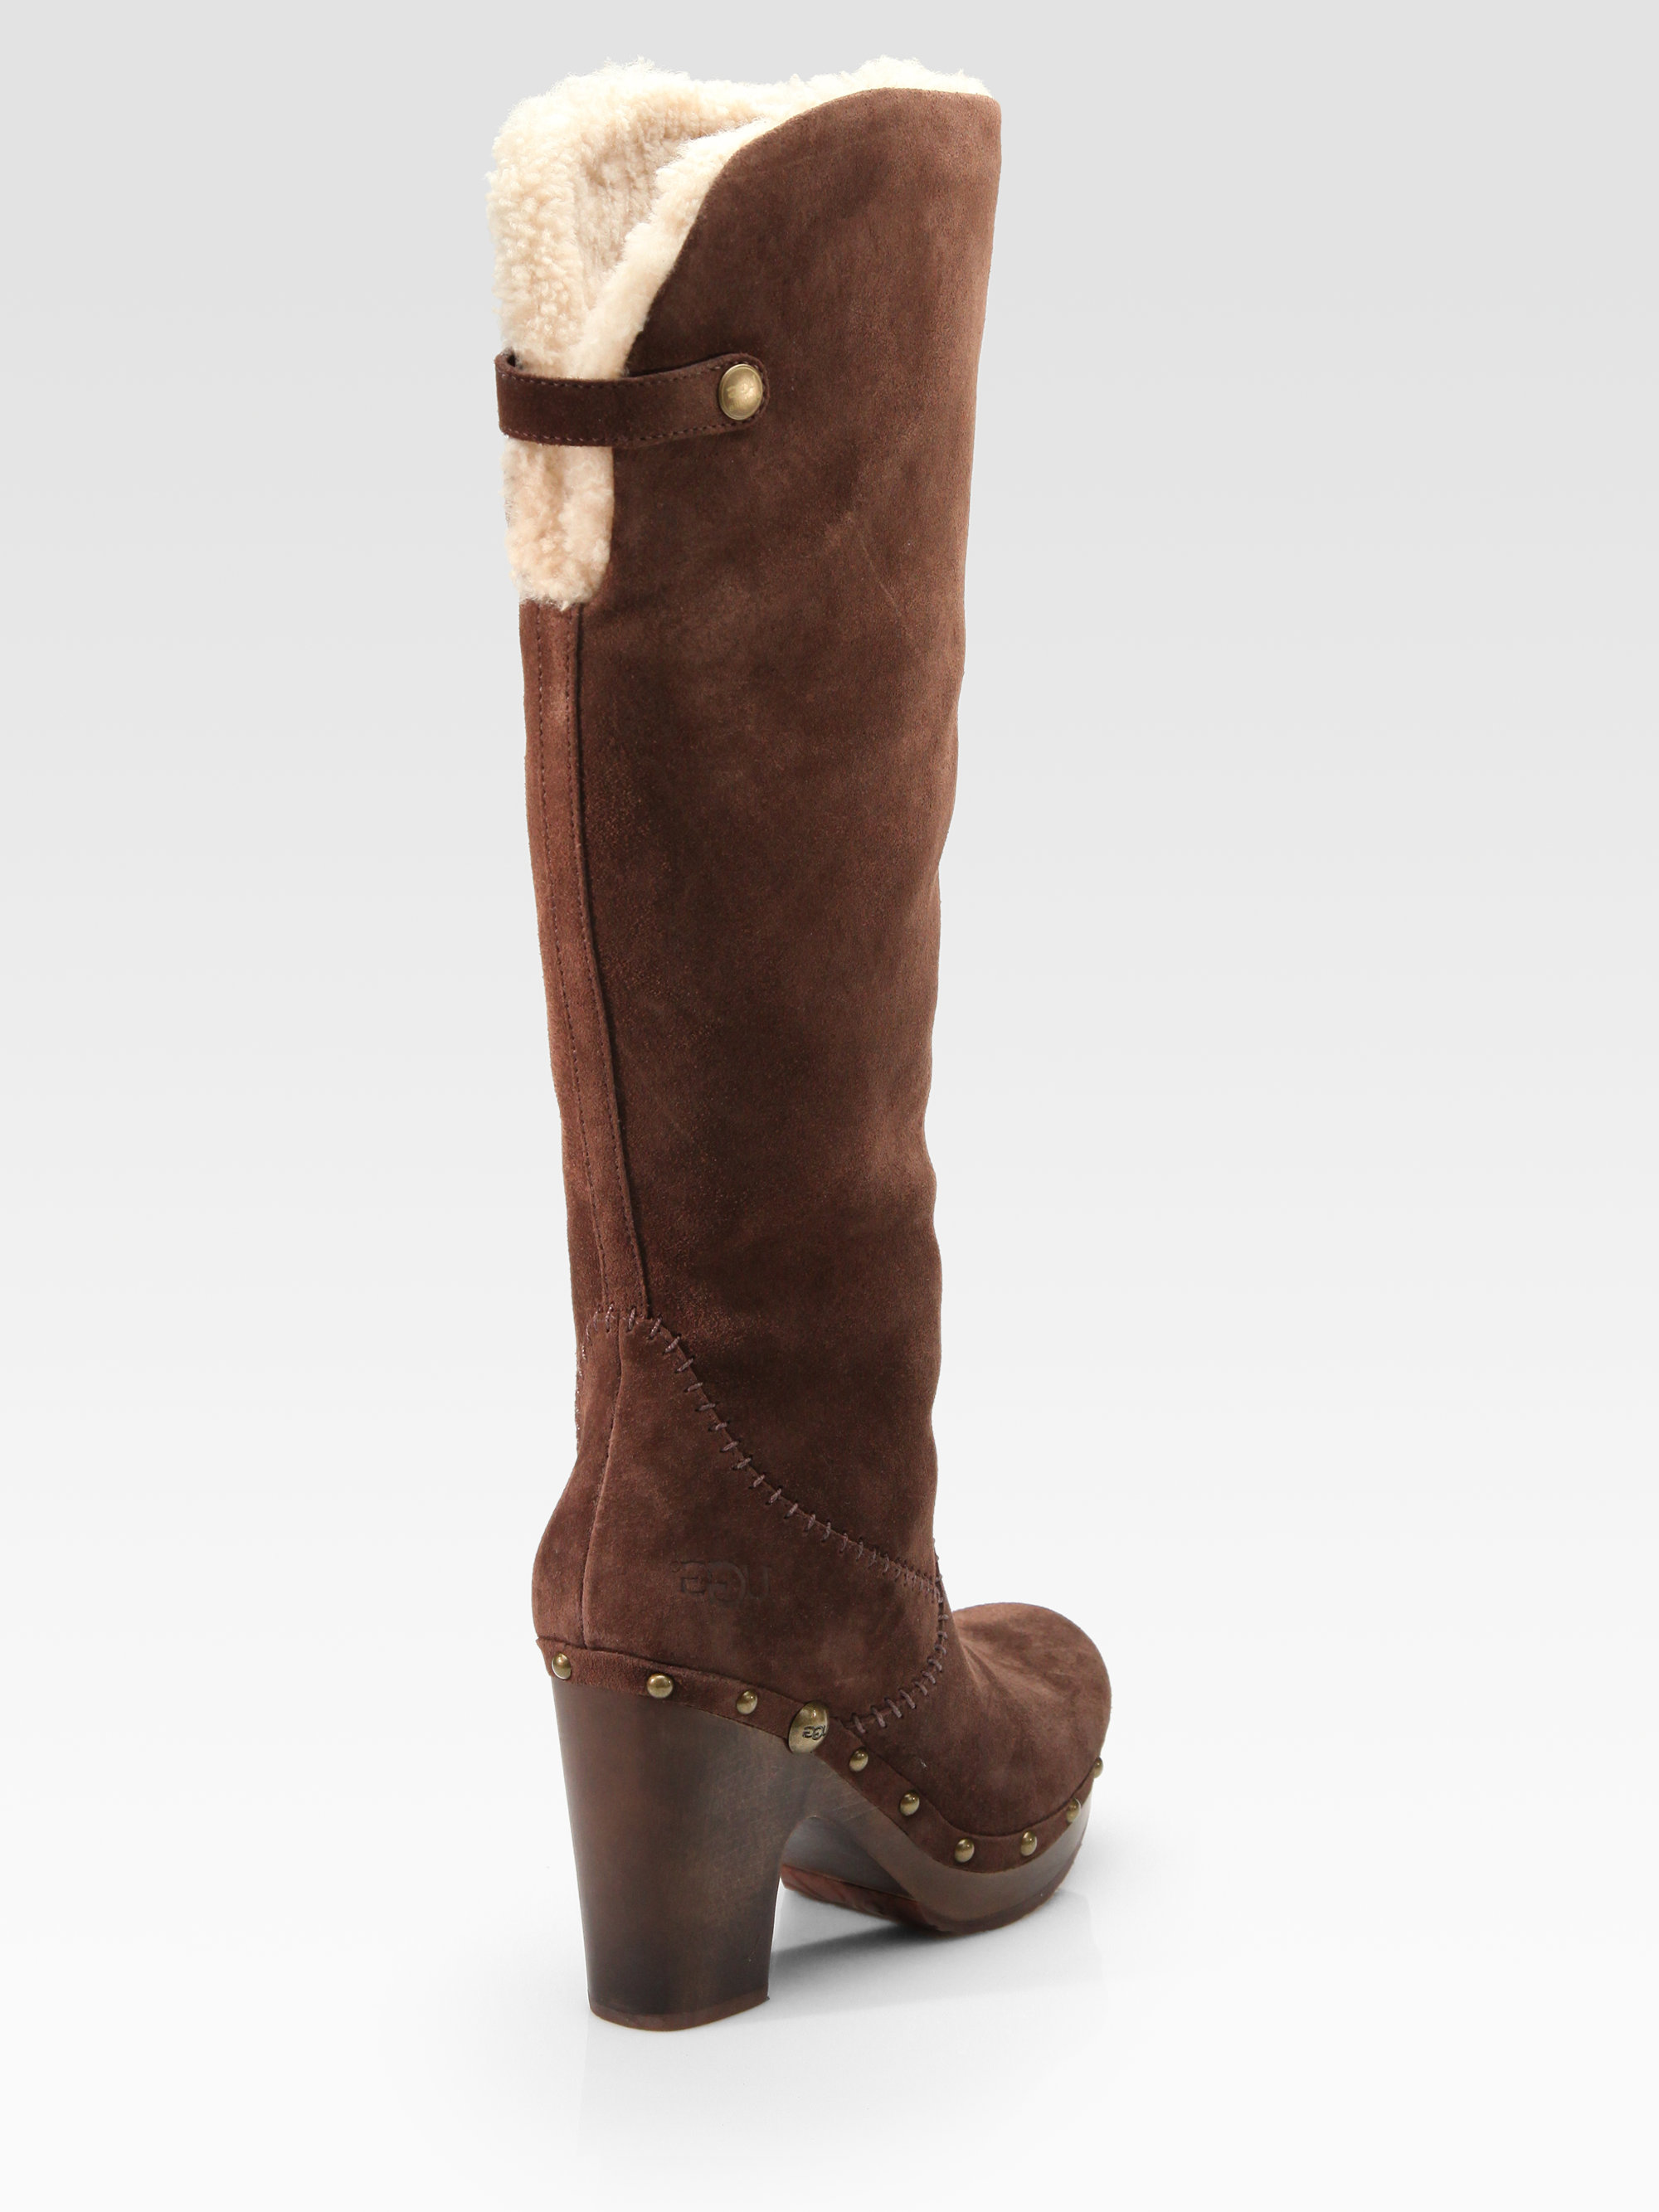 Buy > uggs clog boots > in stock